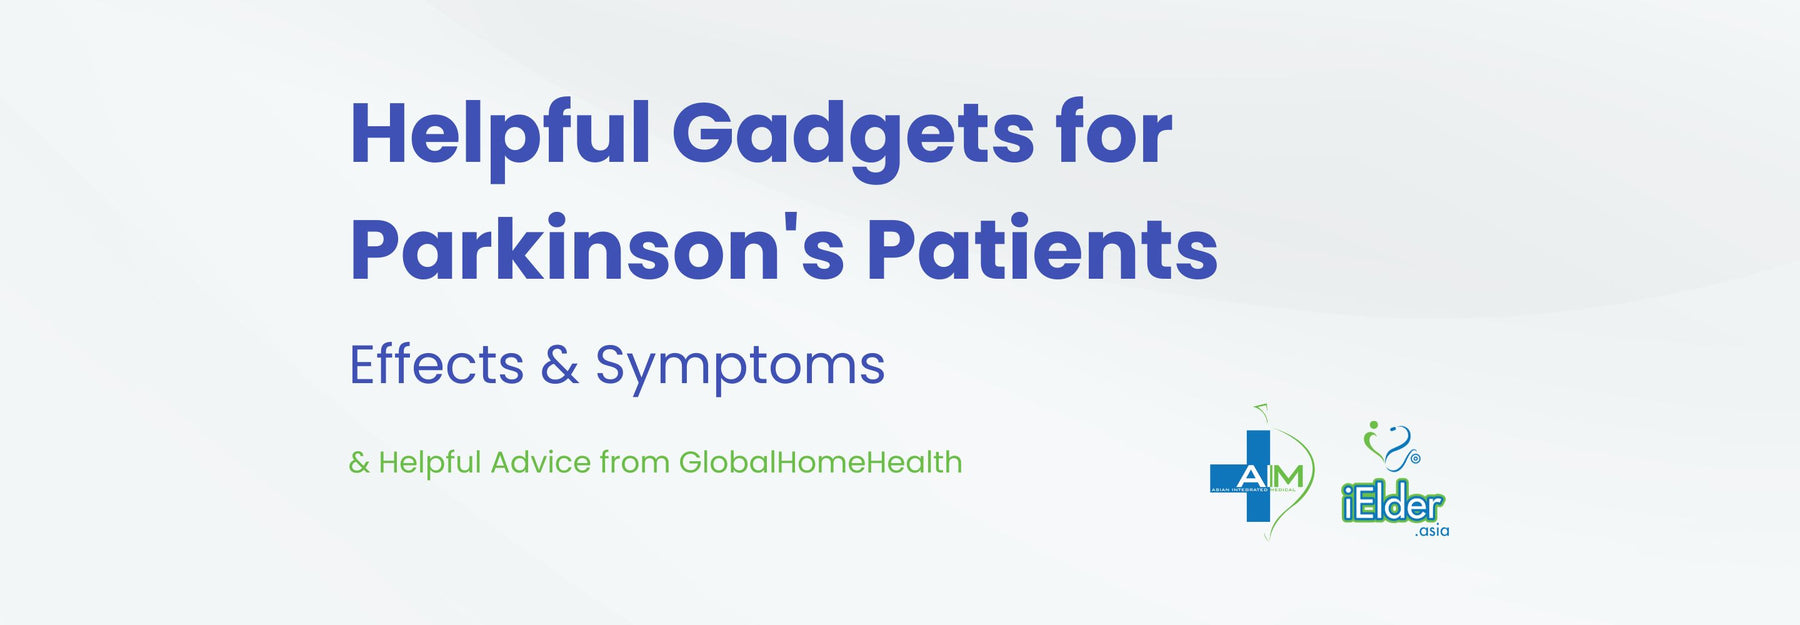 Recommended Helpful Gadgets for Parkinson's Patients